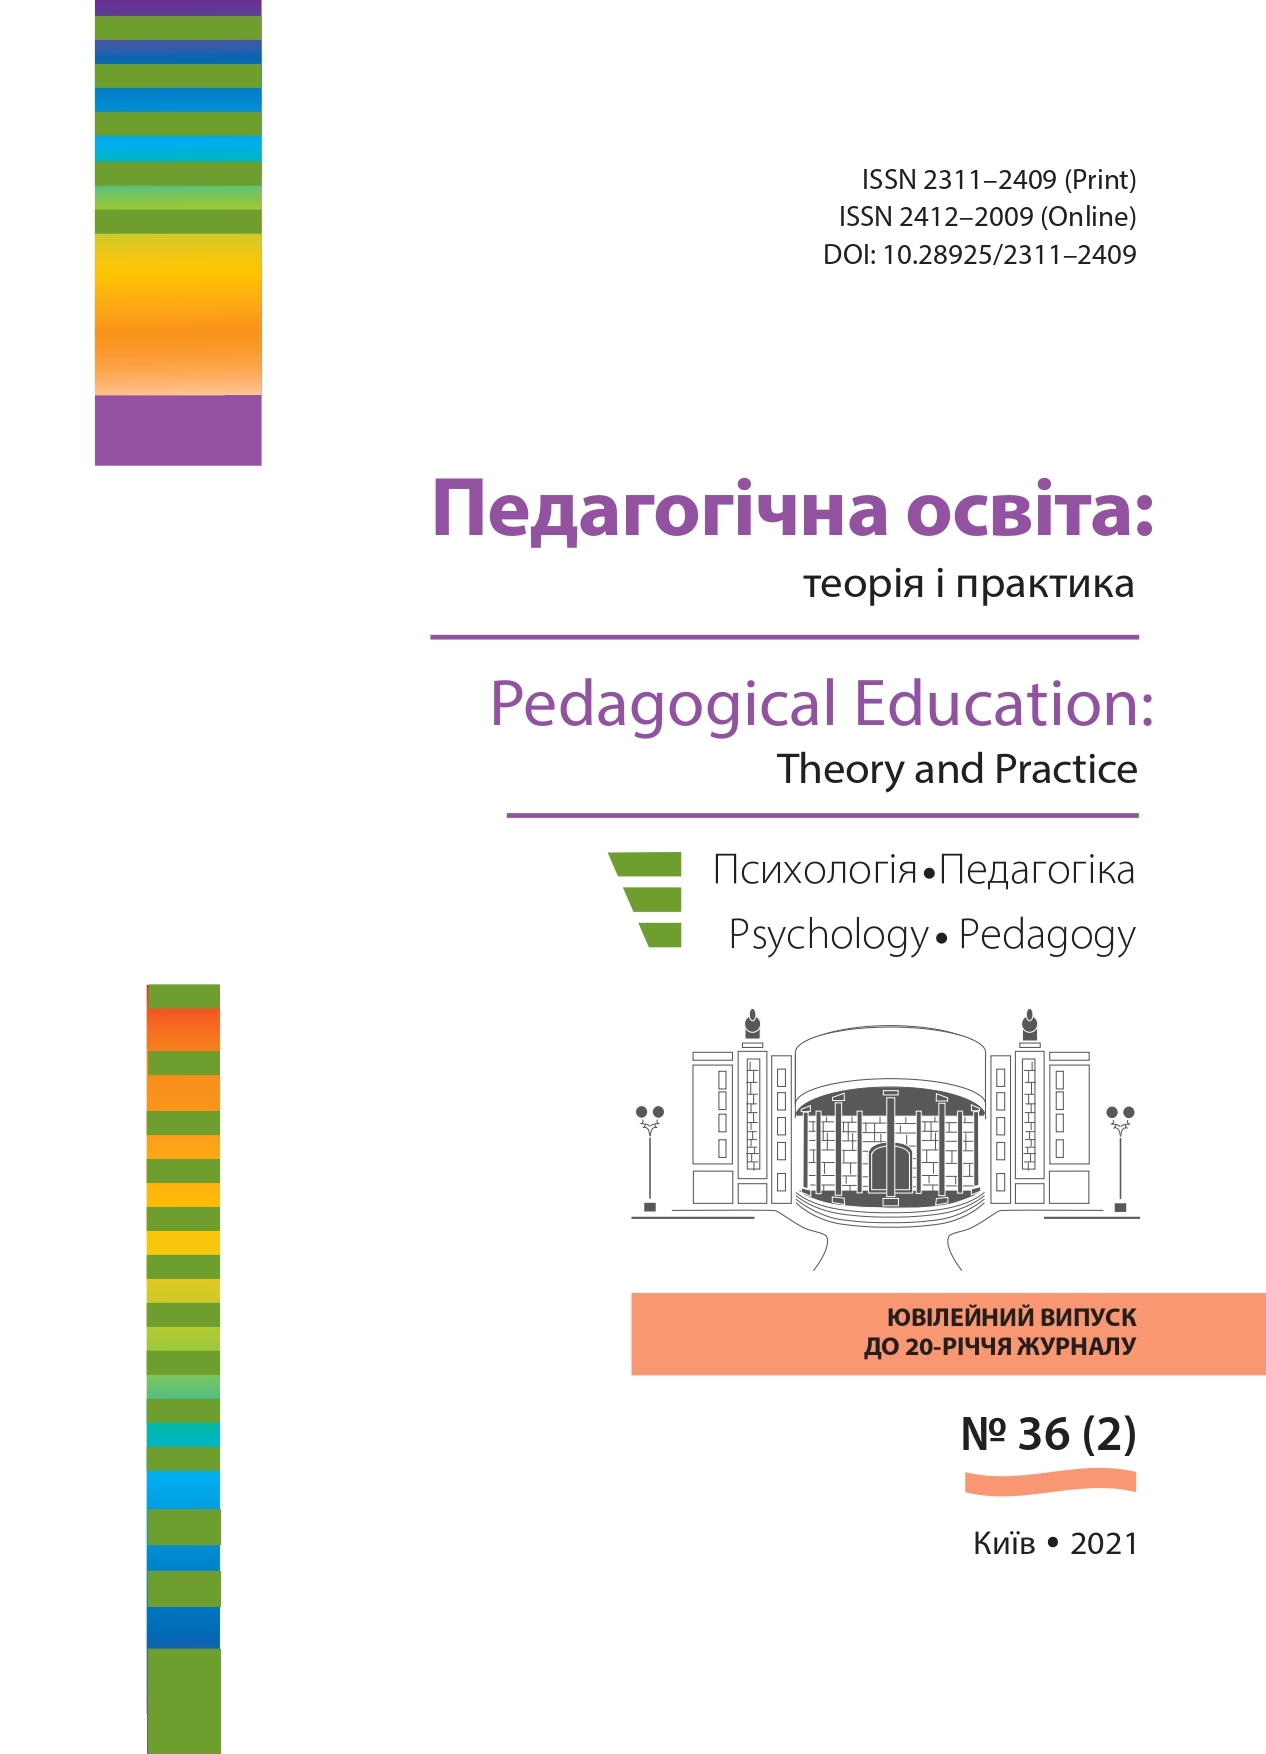 					View No. 36 (2) (2021): Pedagogіcal education: Theory and Practice. Psychology. Pedagogy.
				